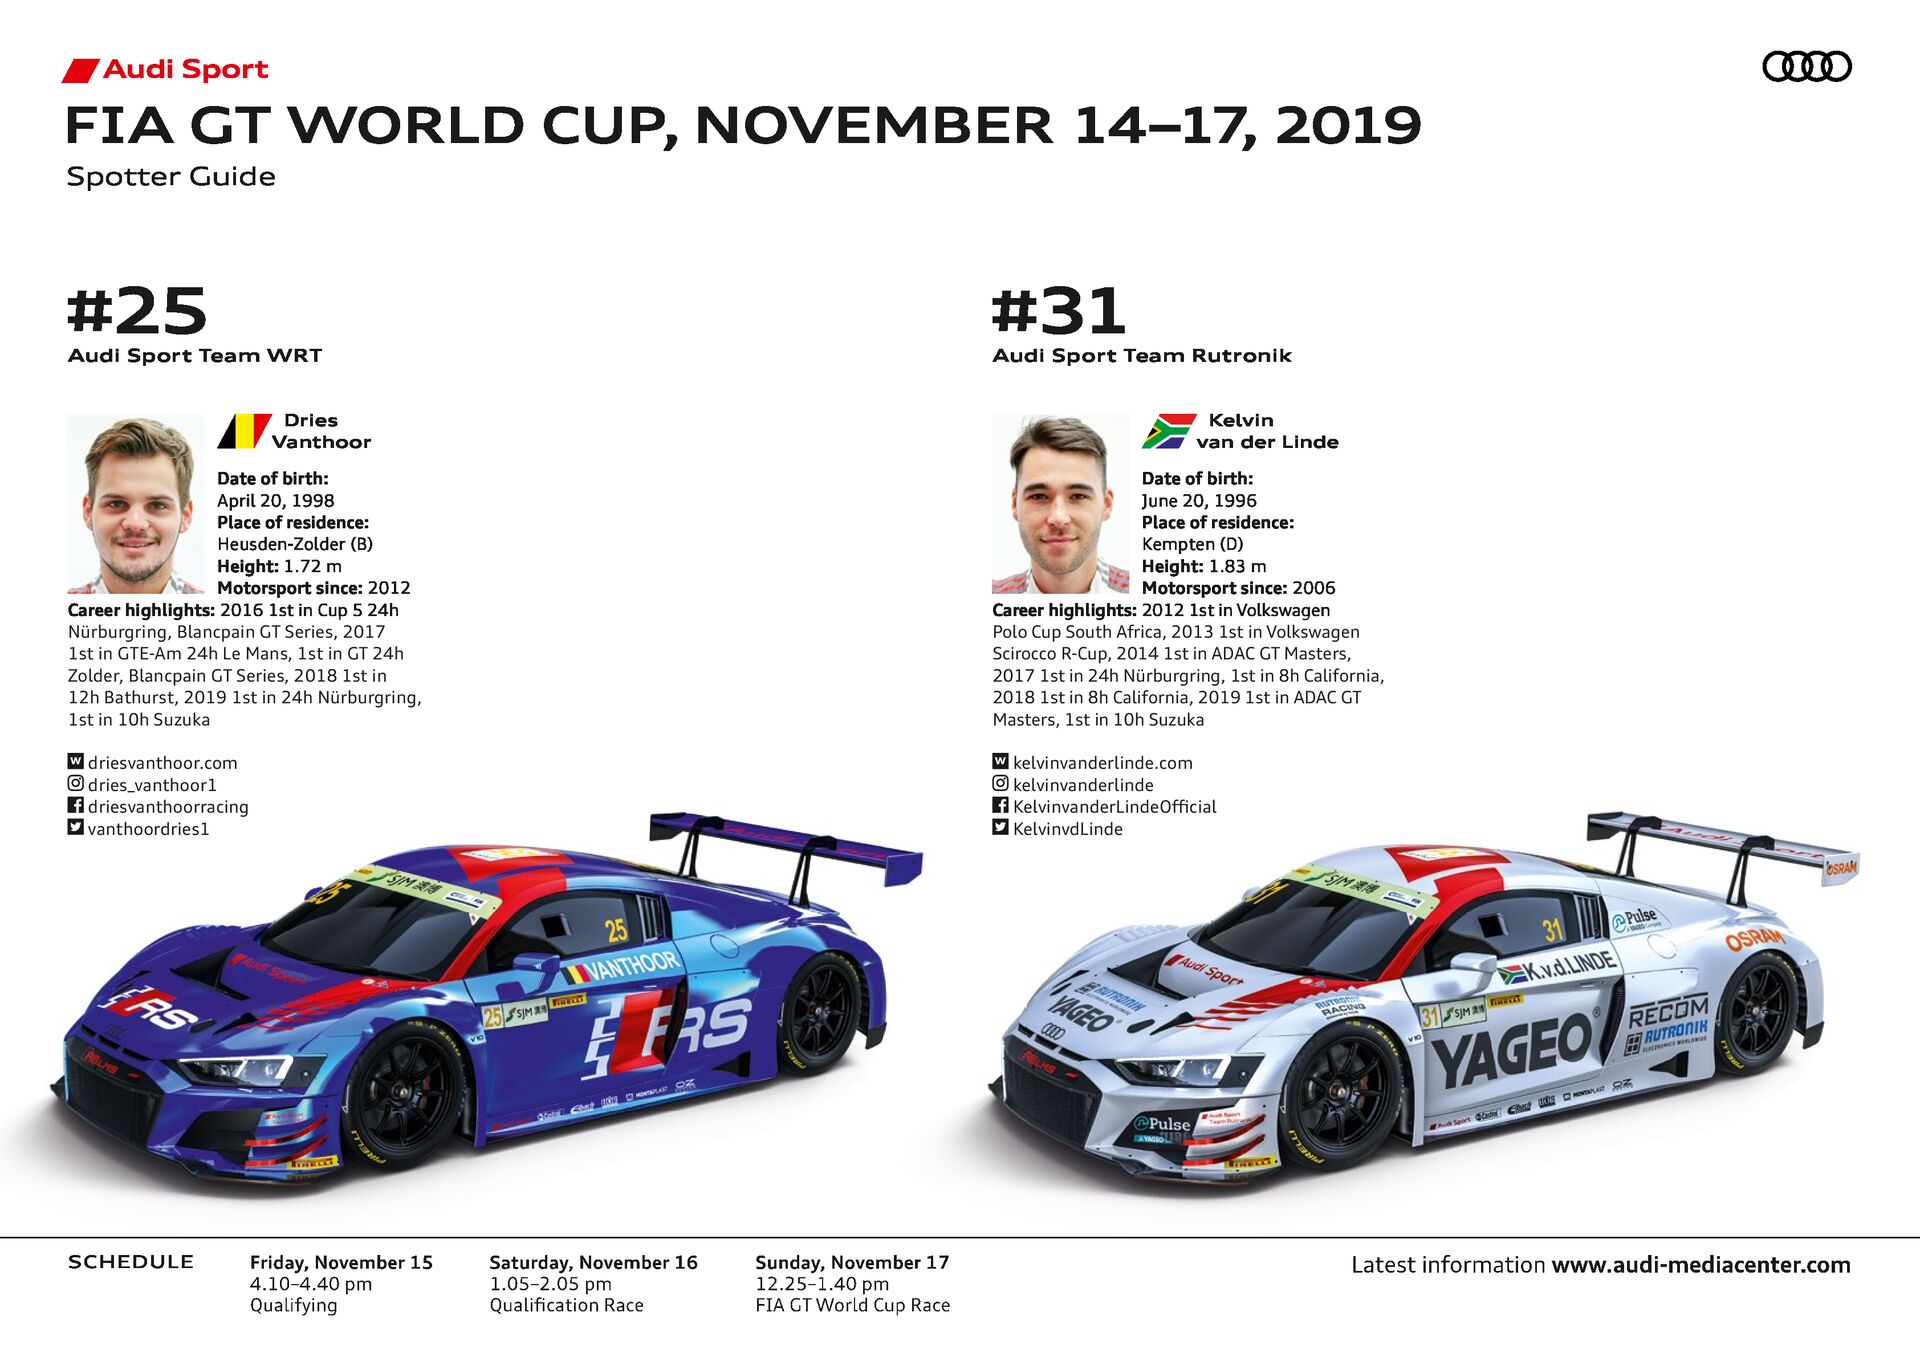 FIA GT World Cup 2019 Spotter Guide